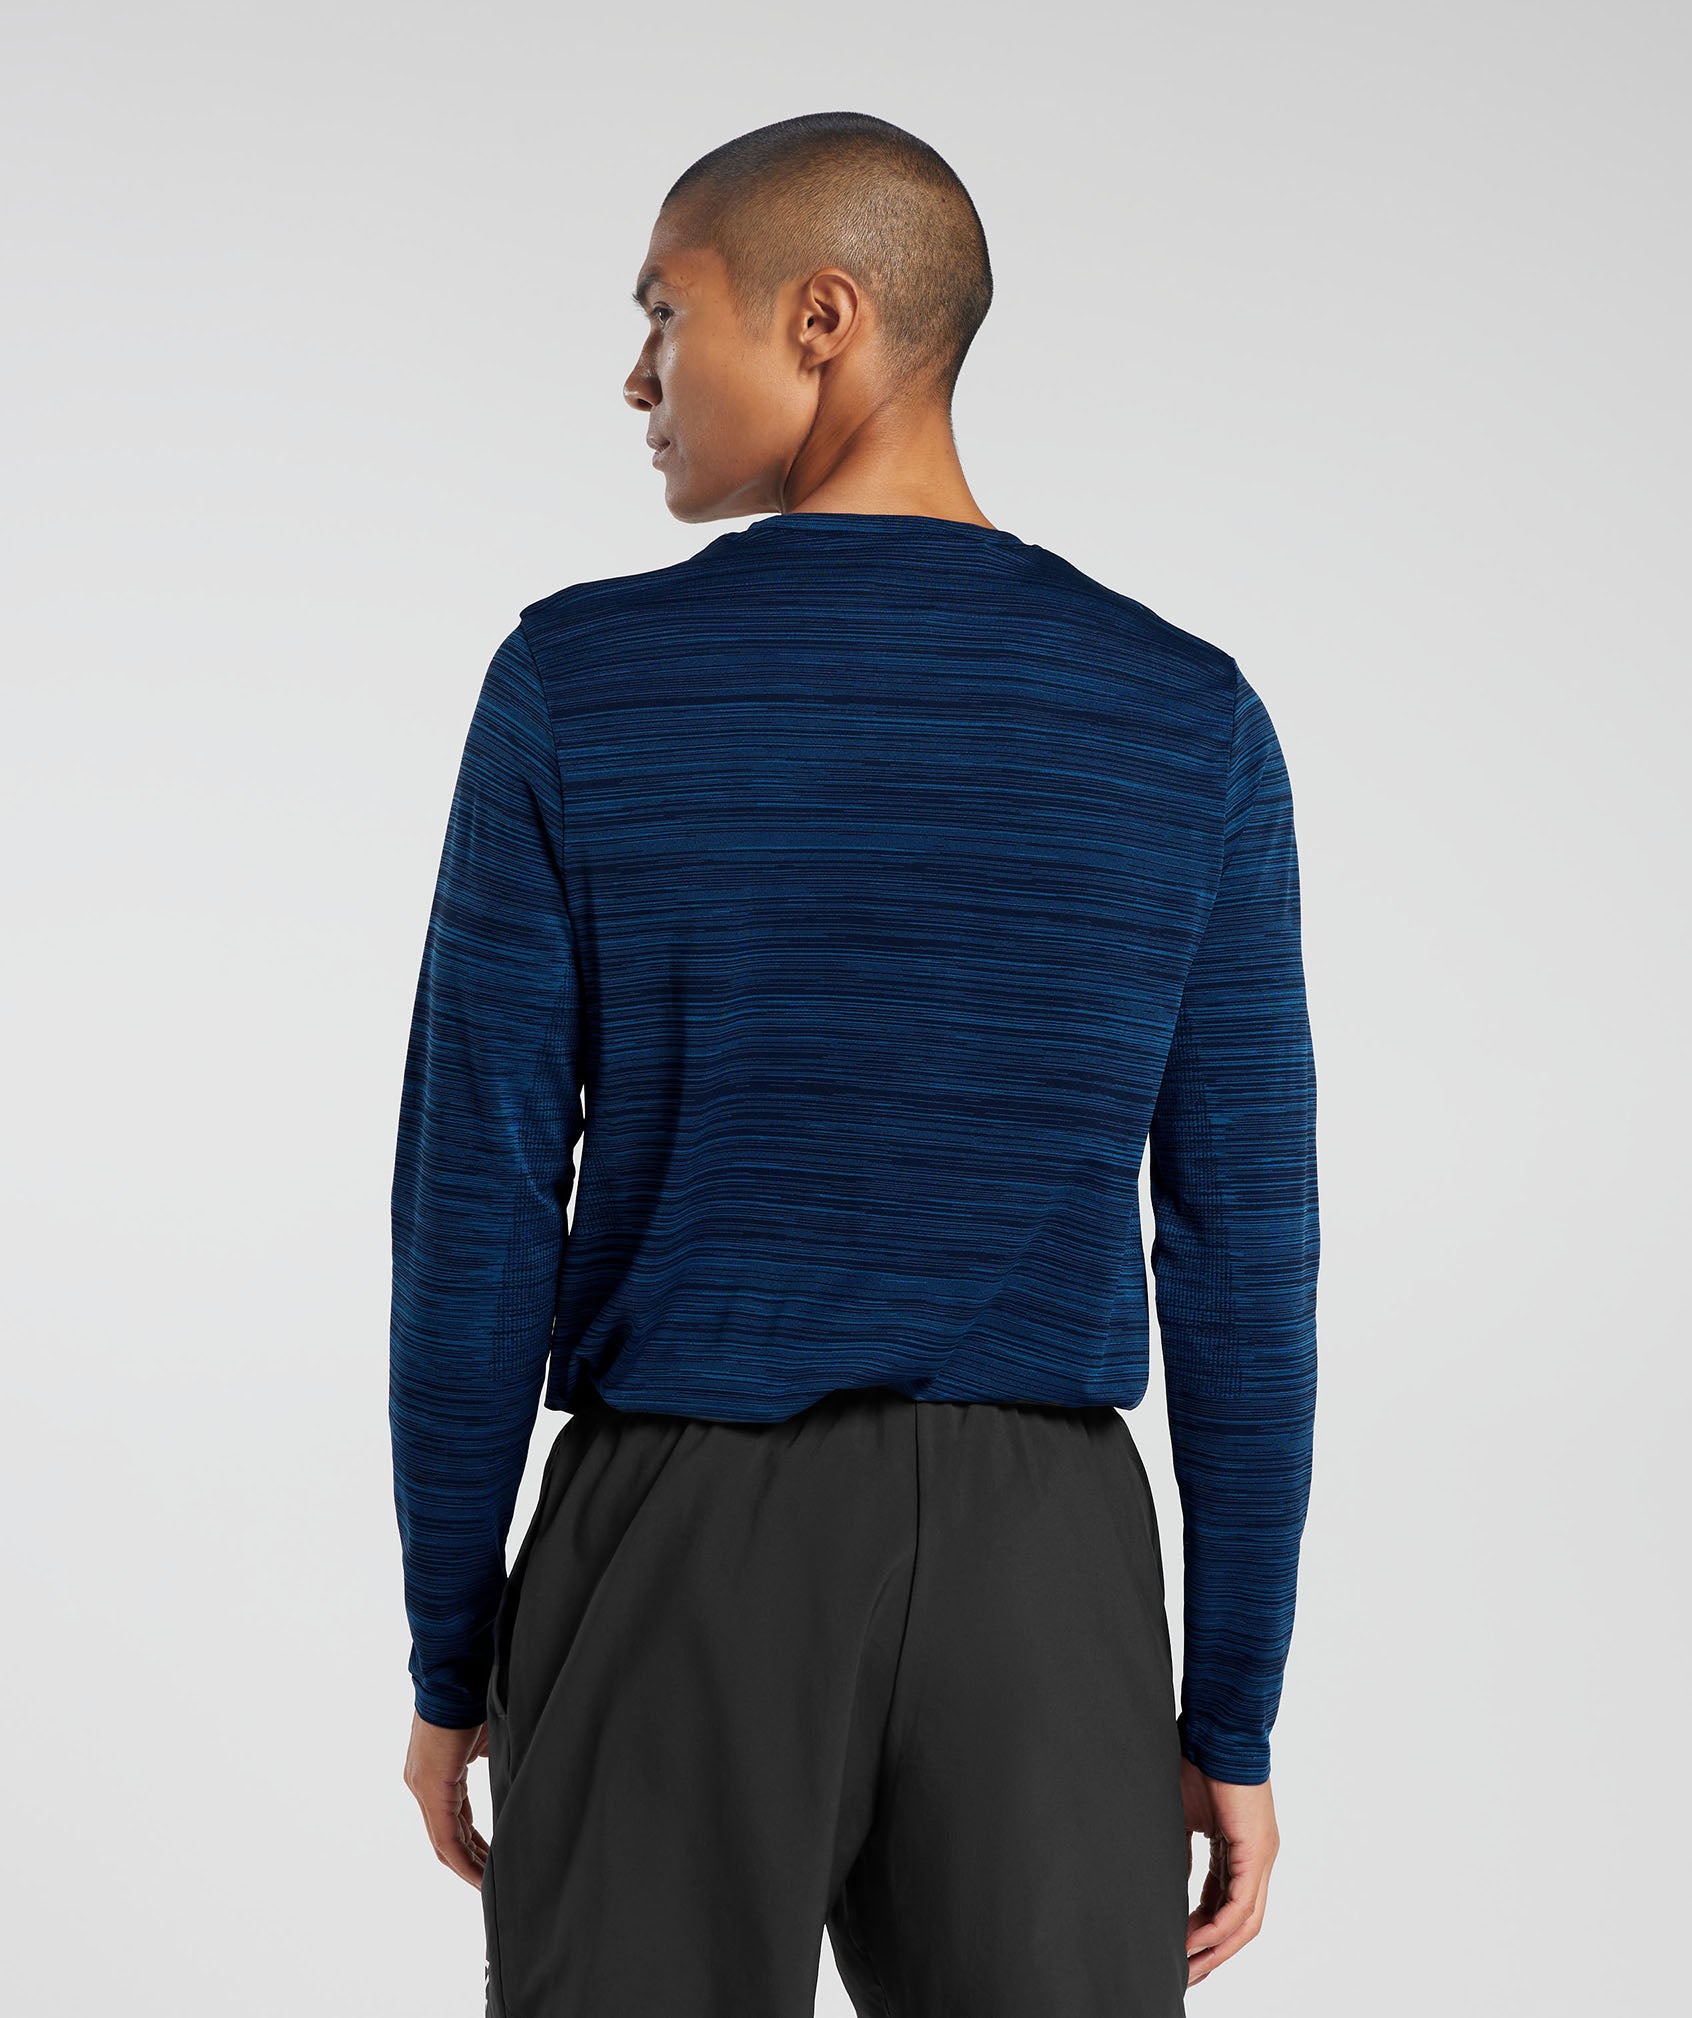 Heather Seamless Long Sleeve T-Shirt in Navy/Core Blue Marl - view 2